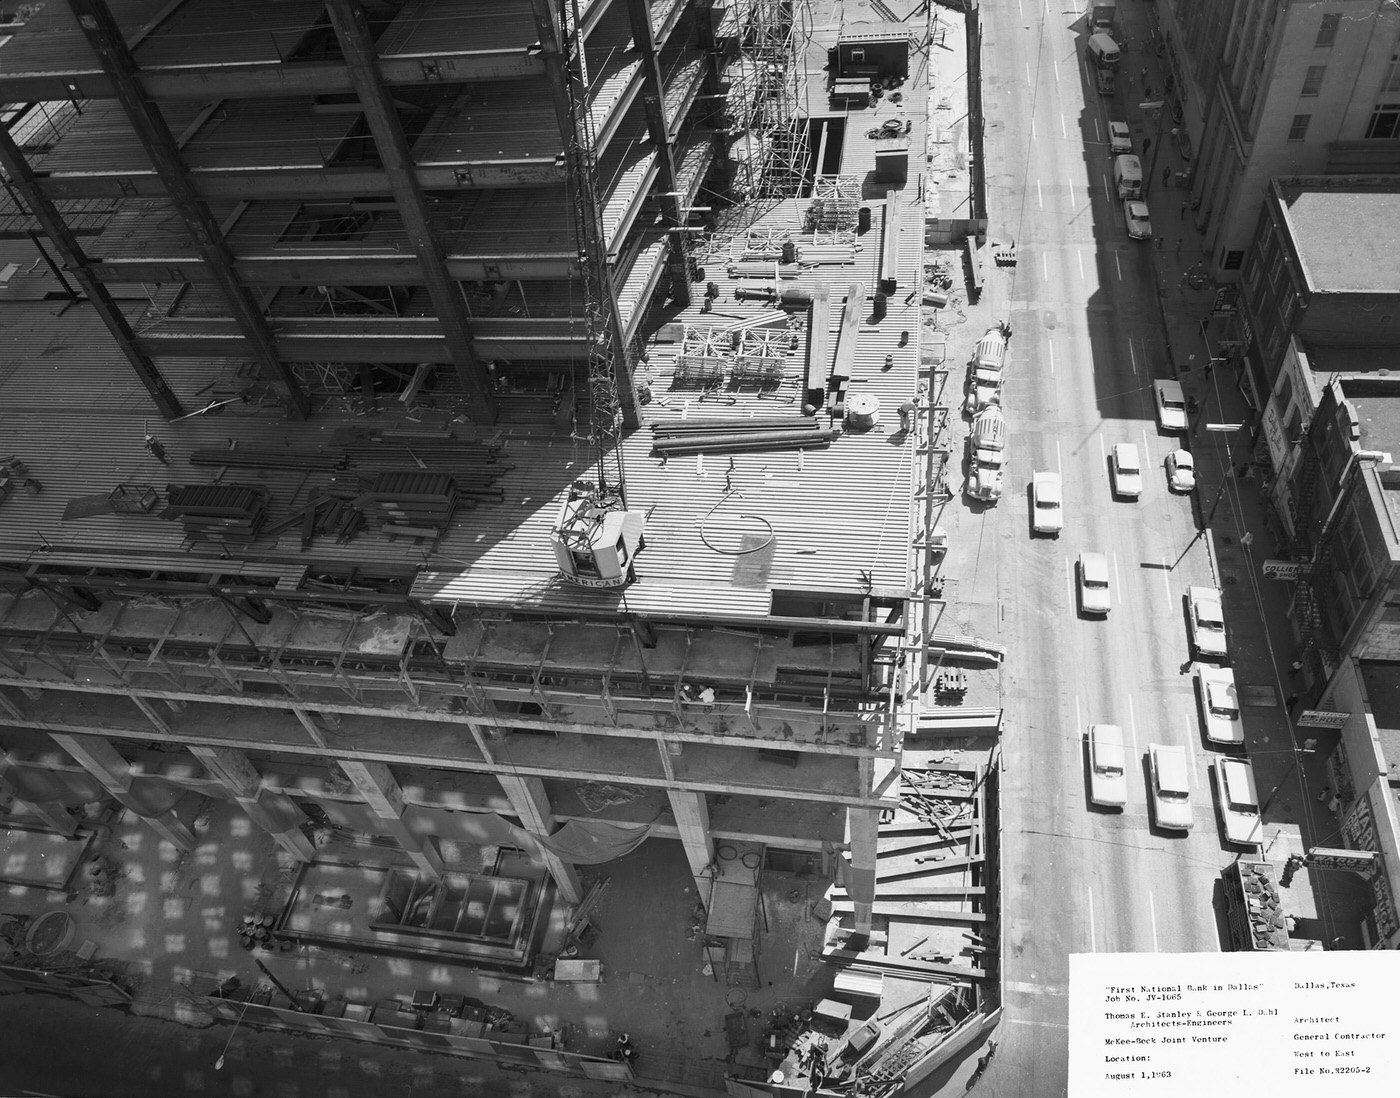 Construction of the First National Bank building, downtown Dallas, Texas, 1983